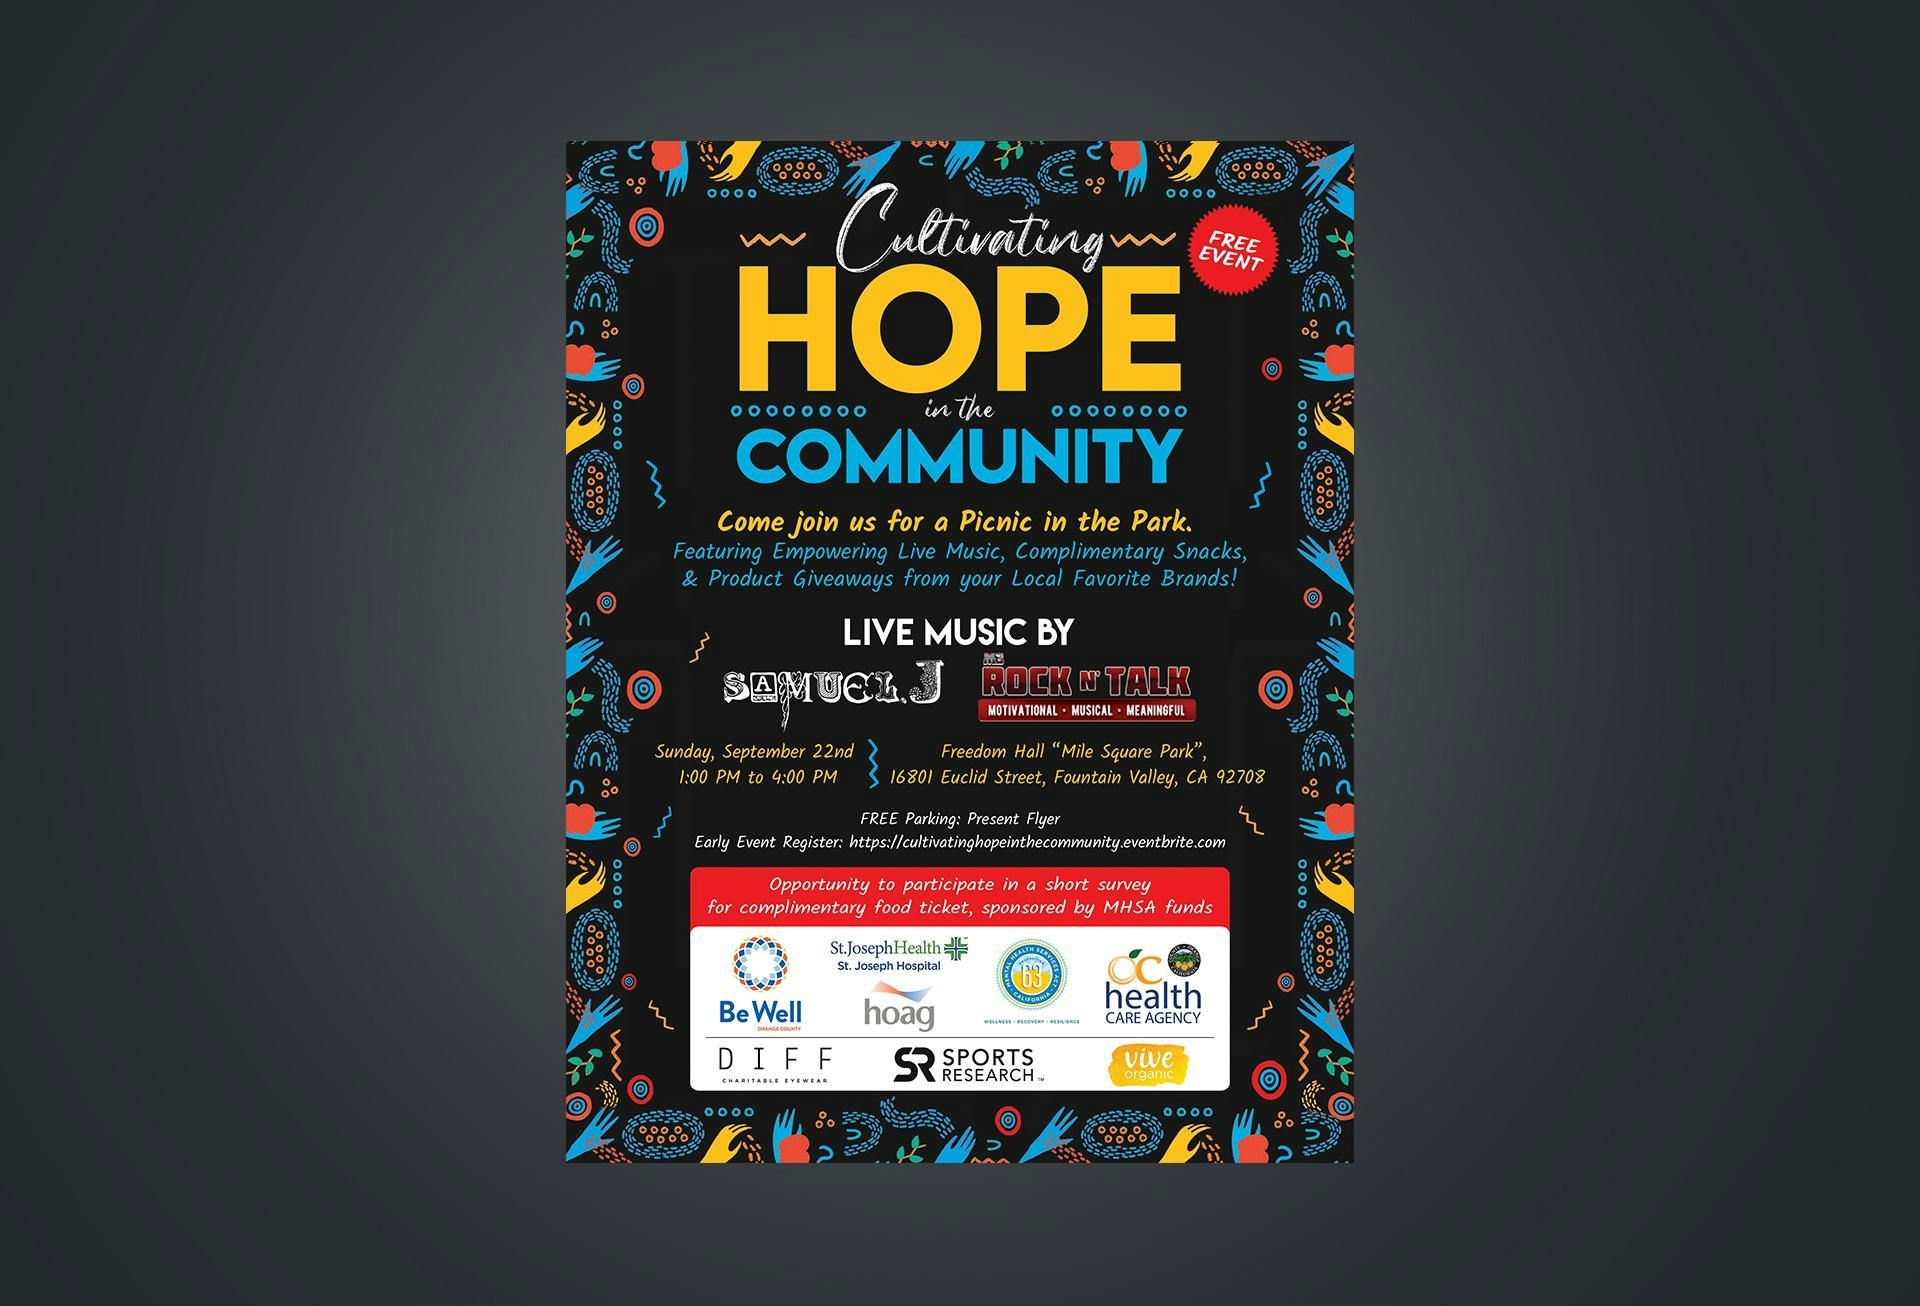 Cultivating Hope in the Community